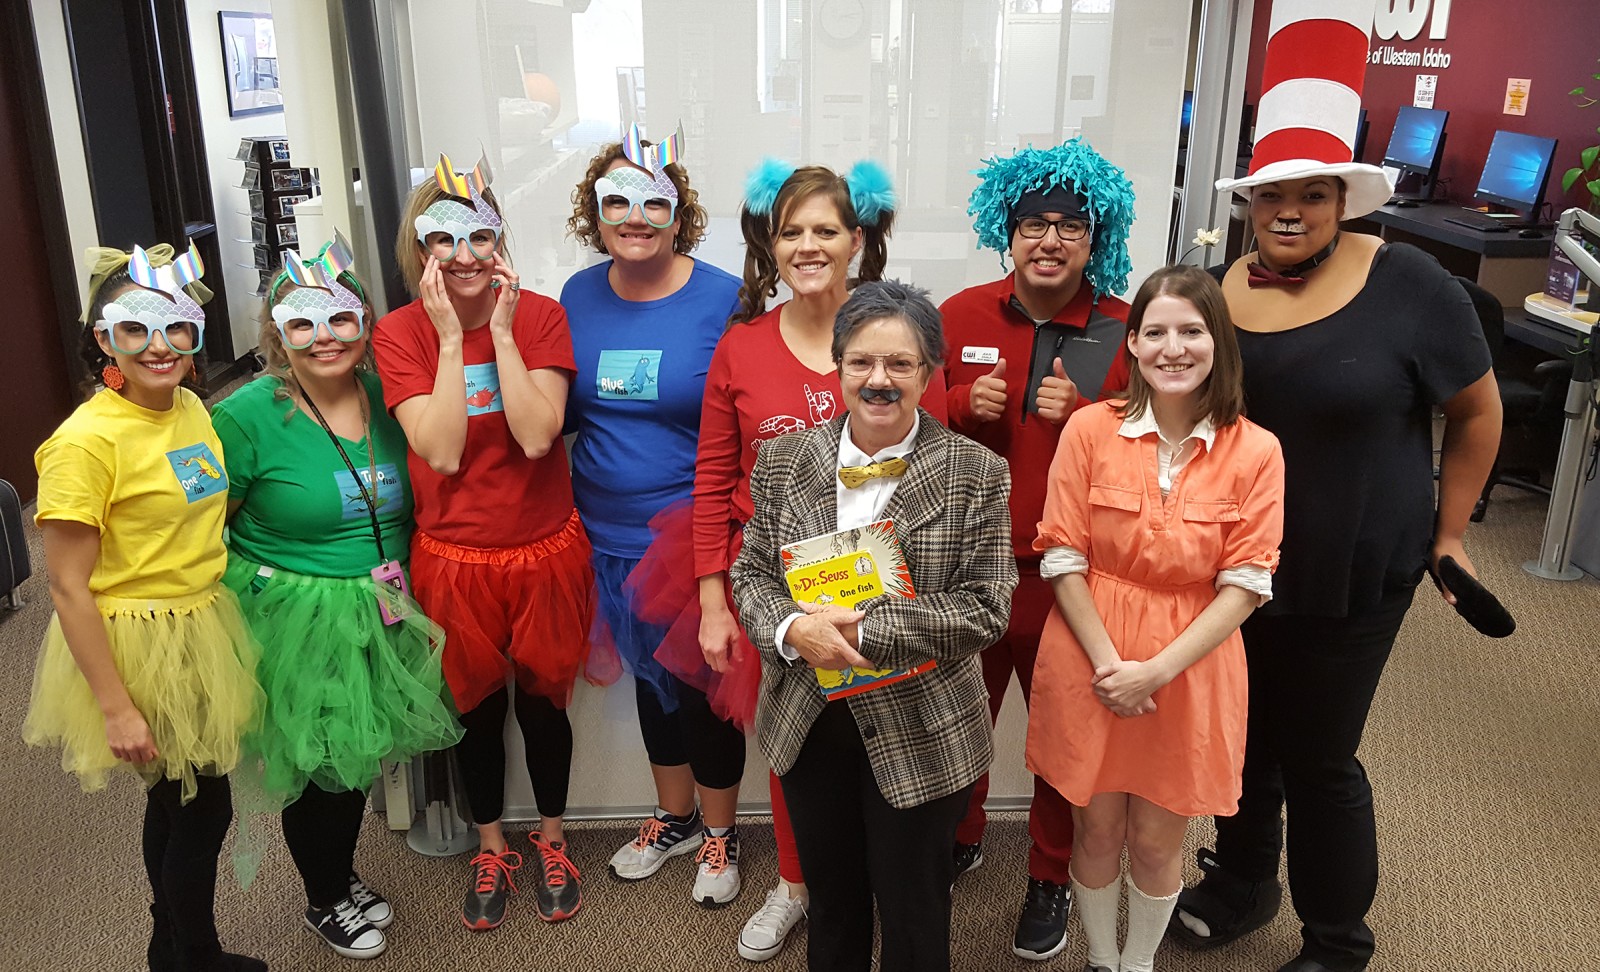 Vote for your favorite employee Halloween costumes – voting closes Nov. 22.